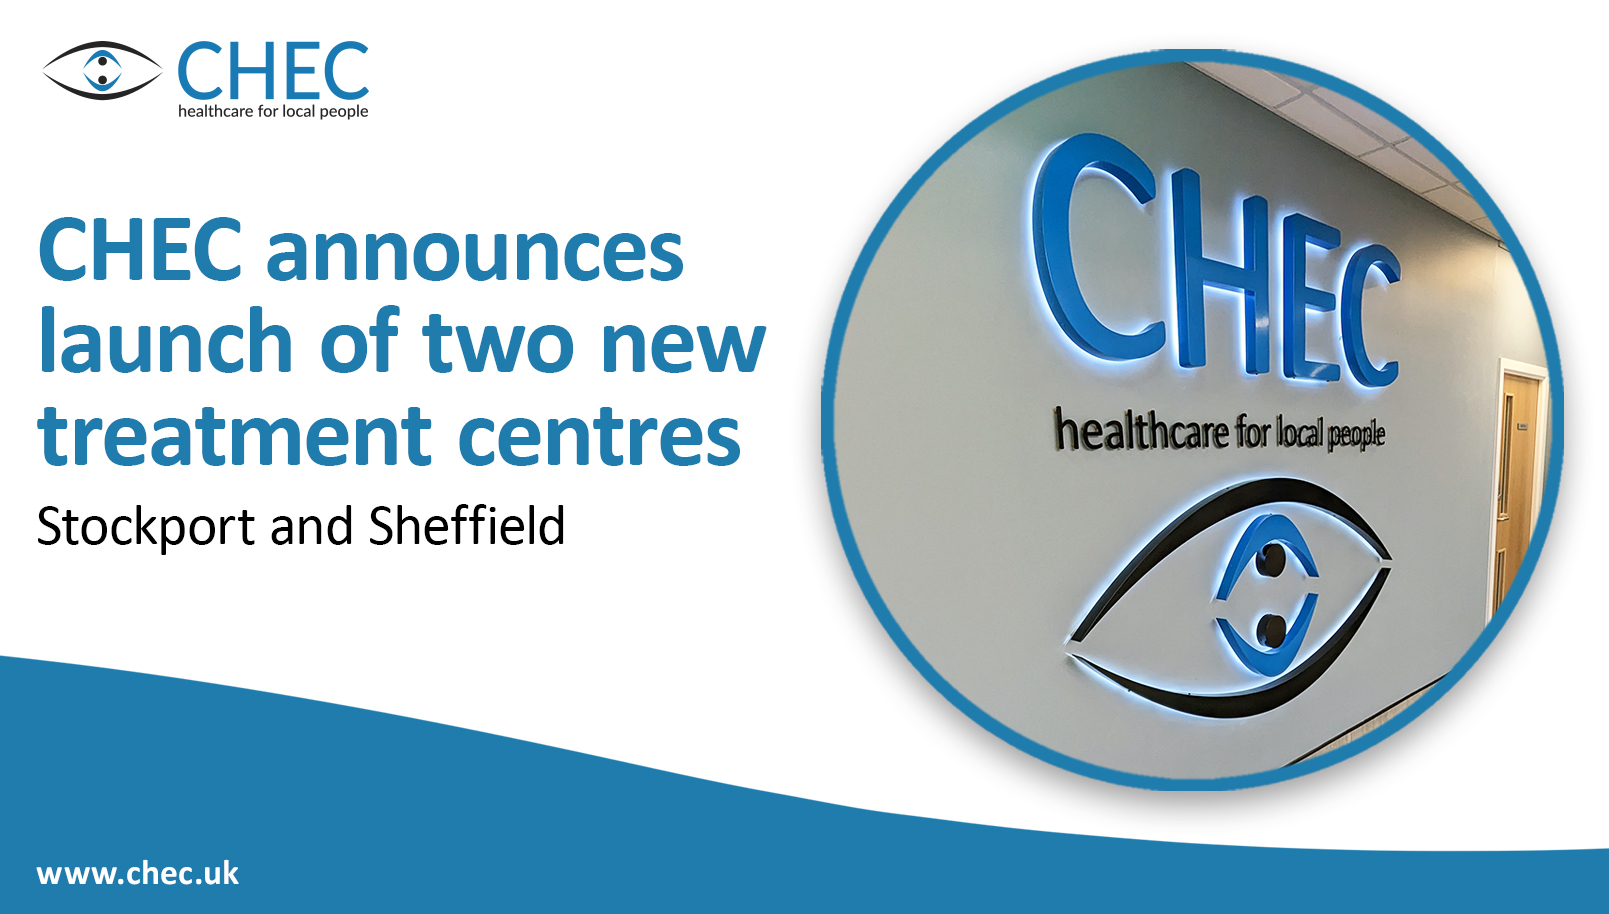 chec announces launch of two new treatment centres in Stockport and Sheffield